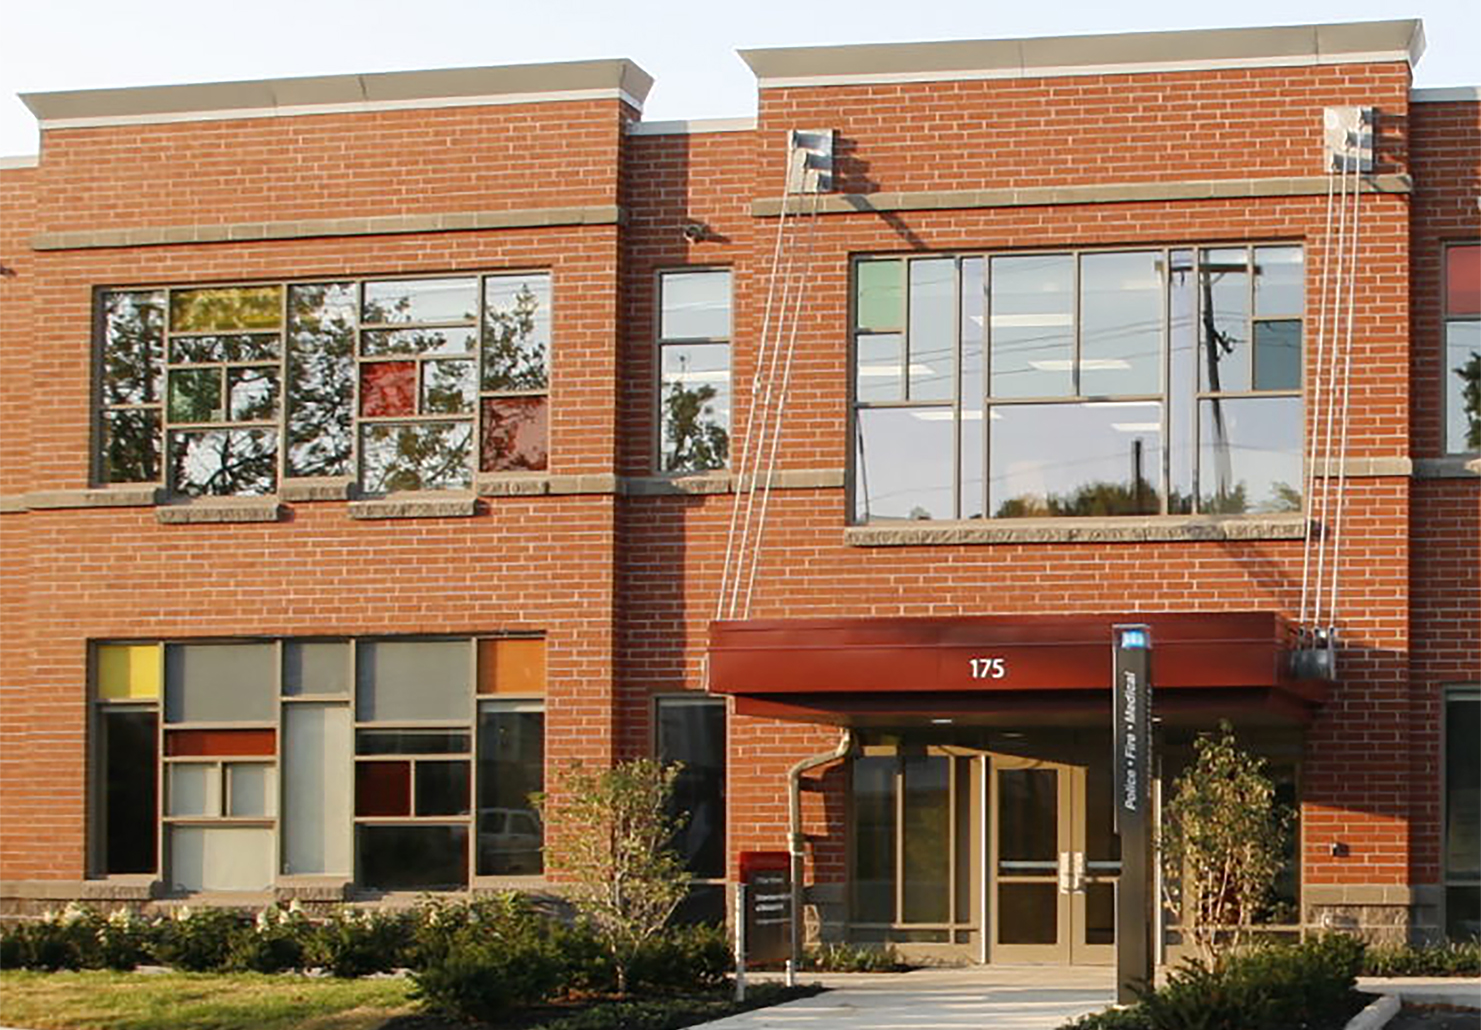 A section of a two-story, brick-fronted building with a red awning over the doors. The building is the Schoenbaum Family Center in Columbus, Ohio, home to Ohio State University's Crane Center for Early Childhood Research and Policy and the A. Sophie Rogers School for Early Learning.